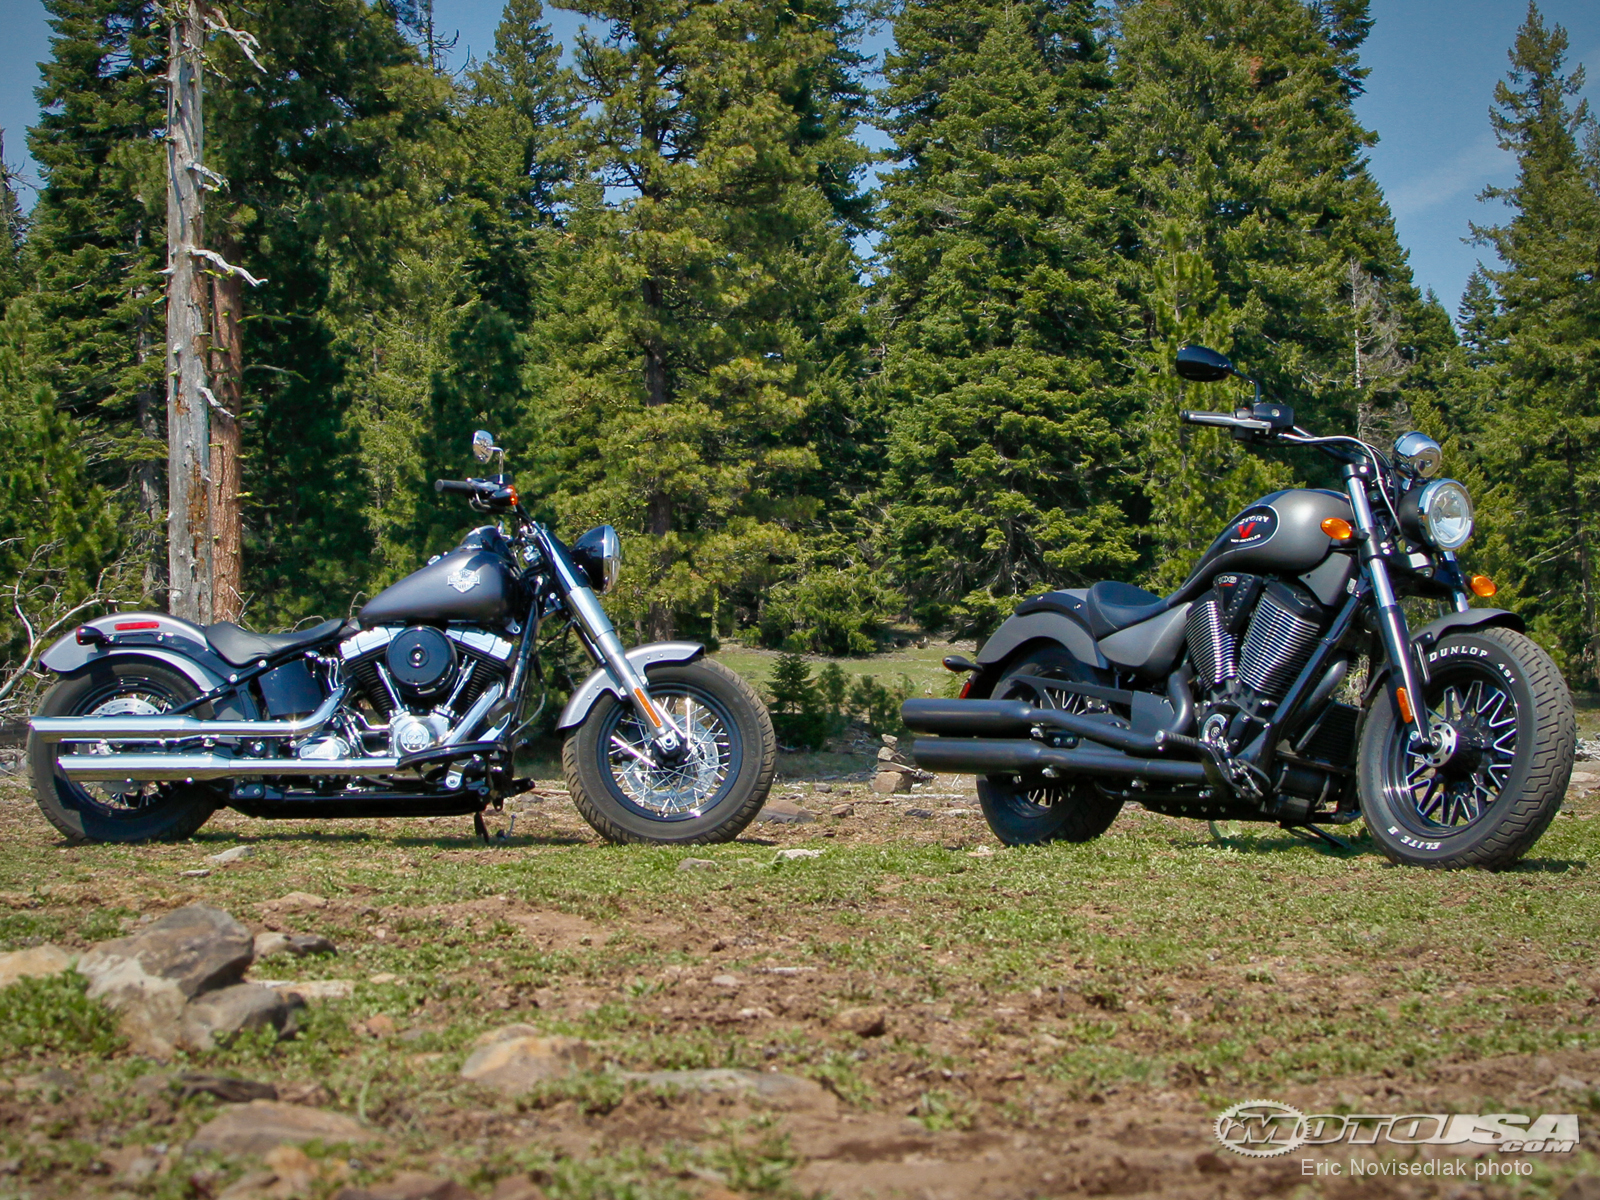 Harley Softail Slim Parison Picture Of Motorcycle Usa